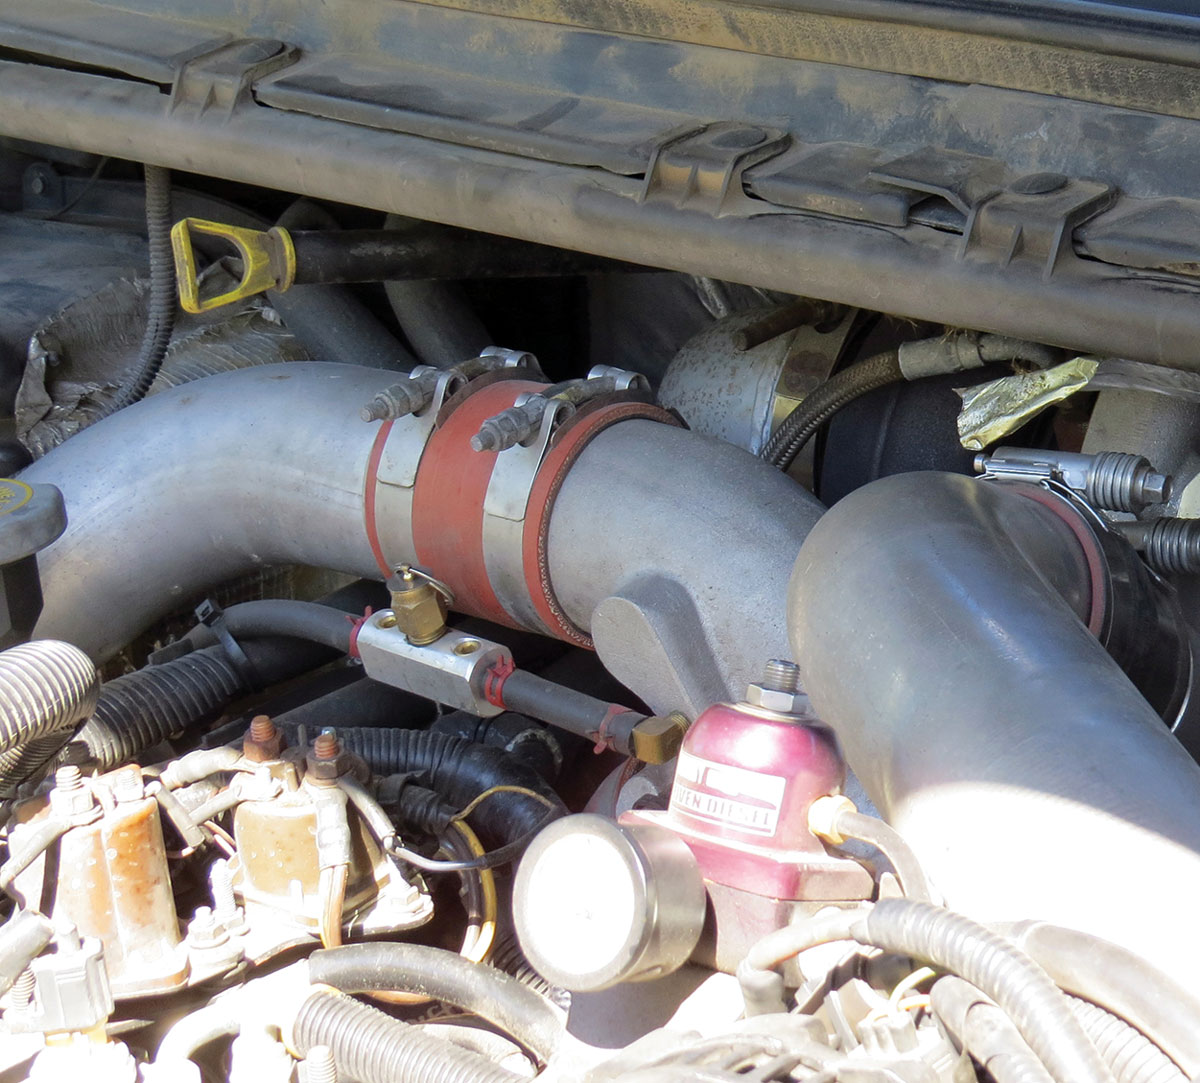 Once you’ve spotted the upgraded Full Force Diesel turbo and its Irate Diesel exhaust tubing, you’ve still only scratched the surface of the complete teardown and overhaul the 7.3L Power Stroke underwent